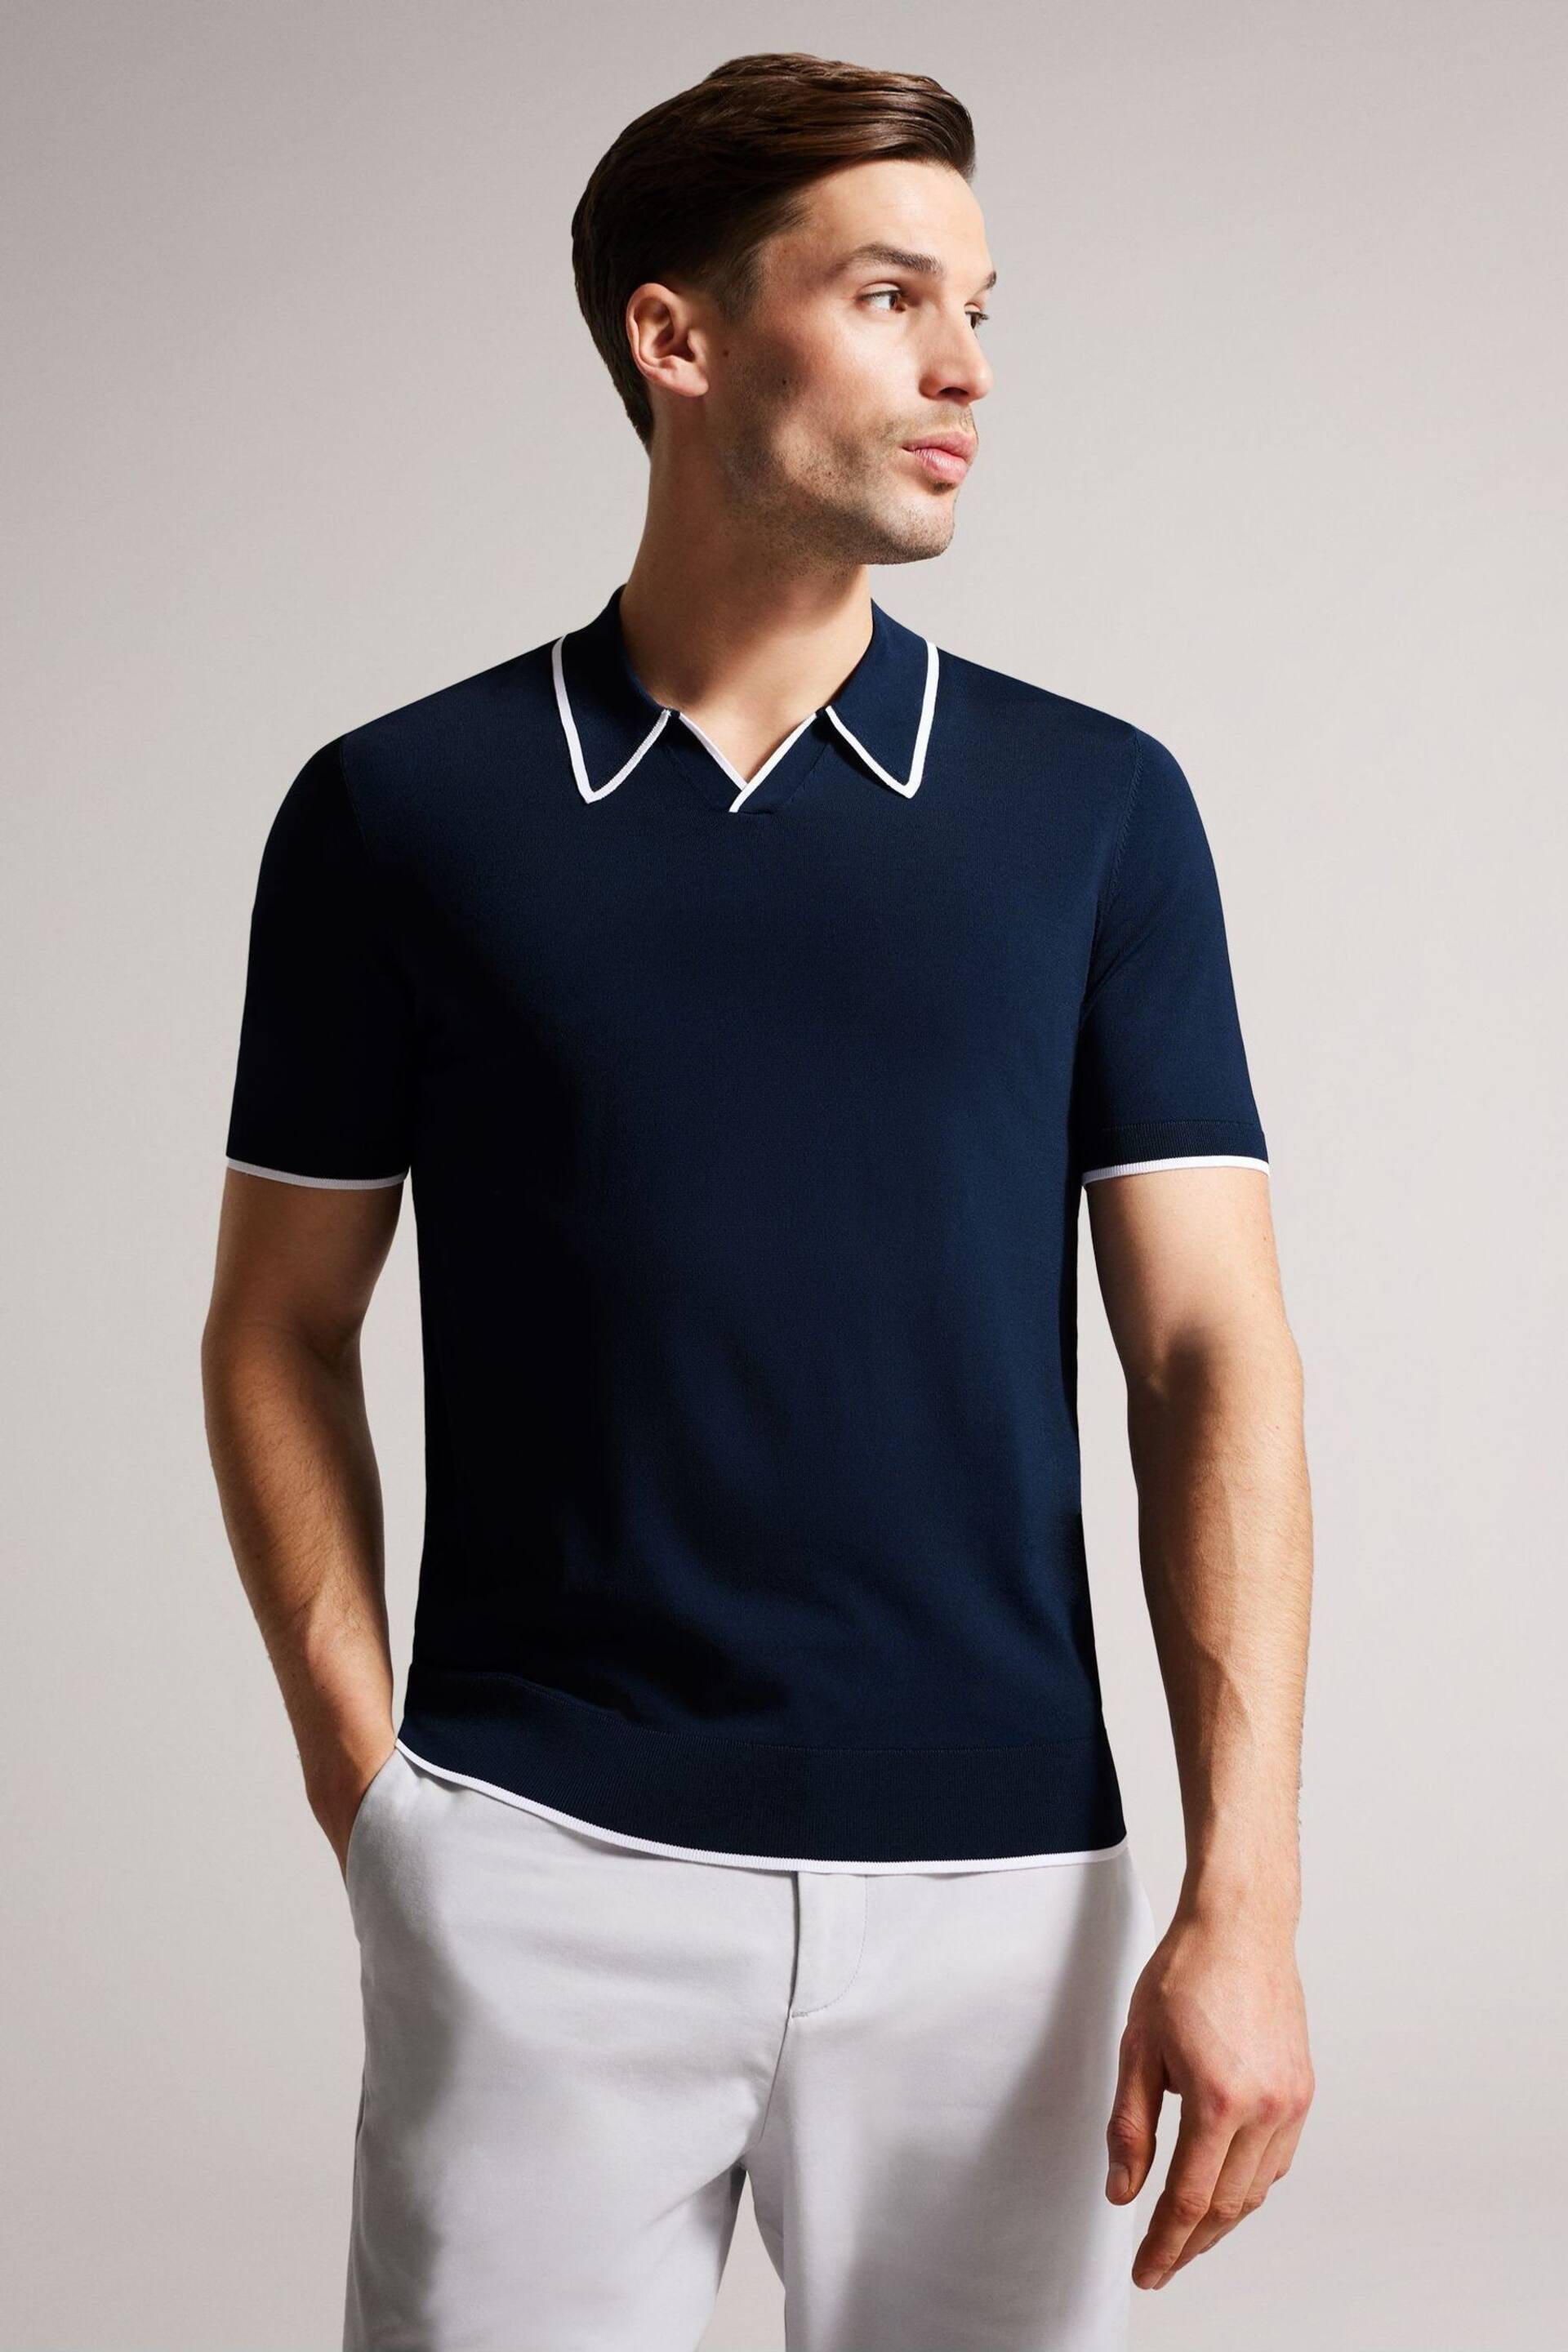 Ted Baker Blue Stortfo Short Sleeved Rayon Open Neck Polo Shirt - Image 6 of 6